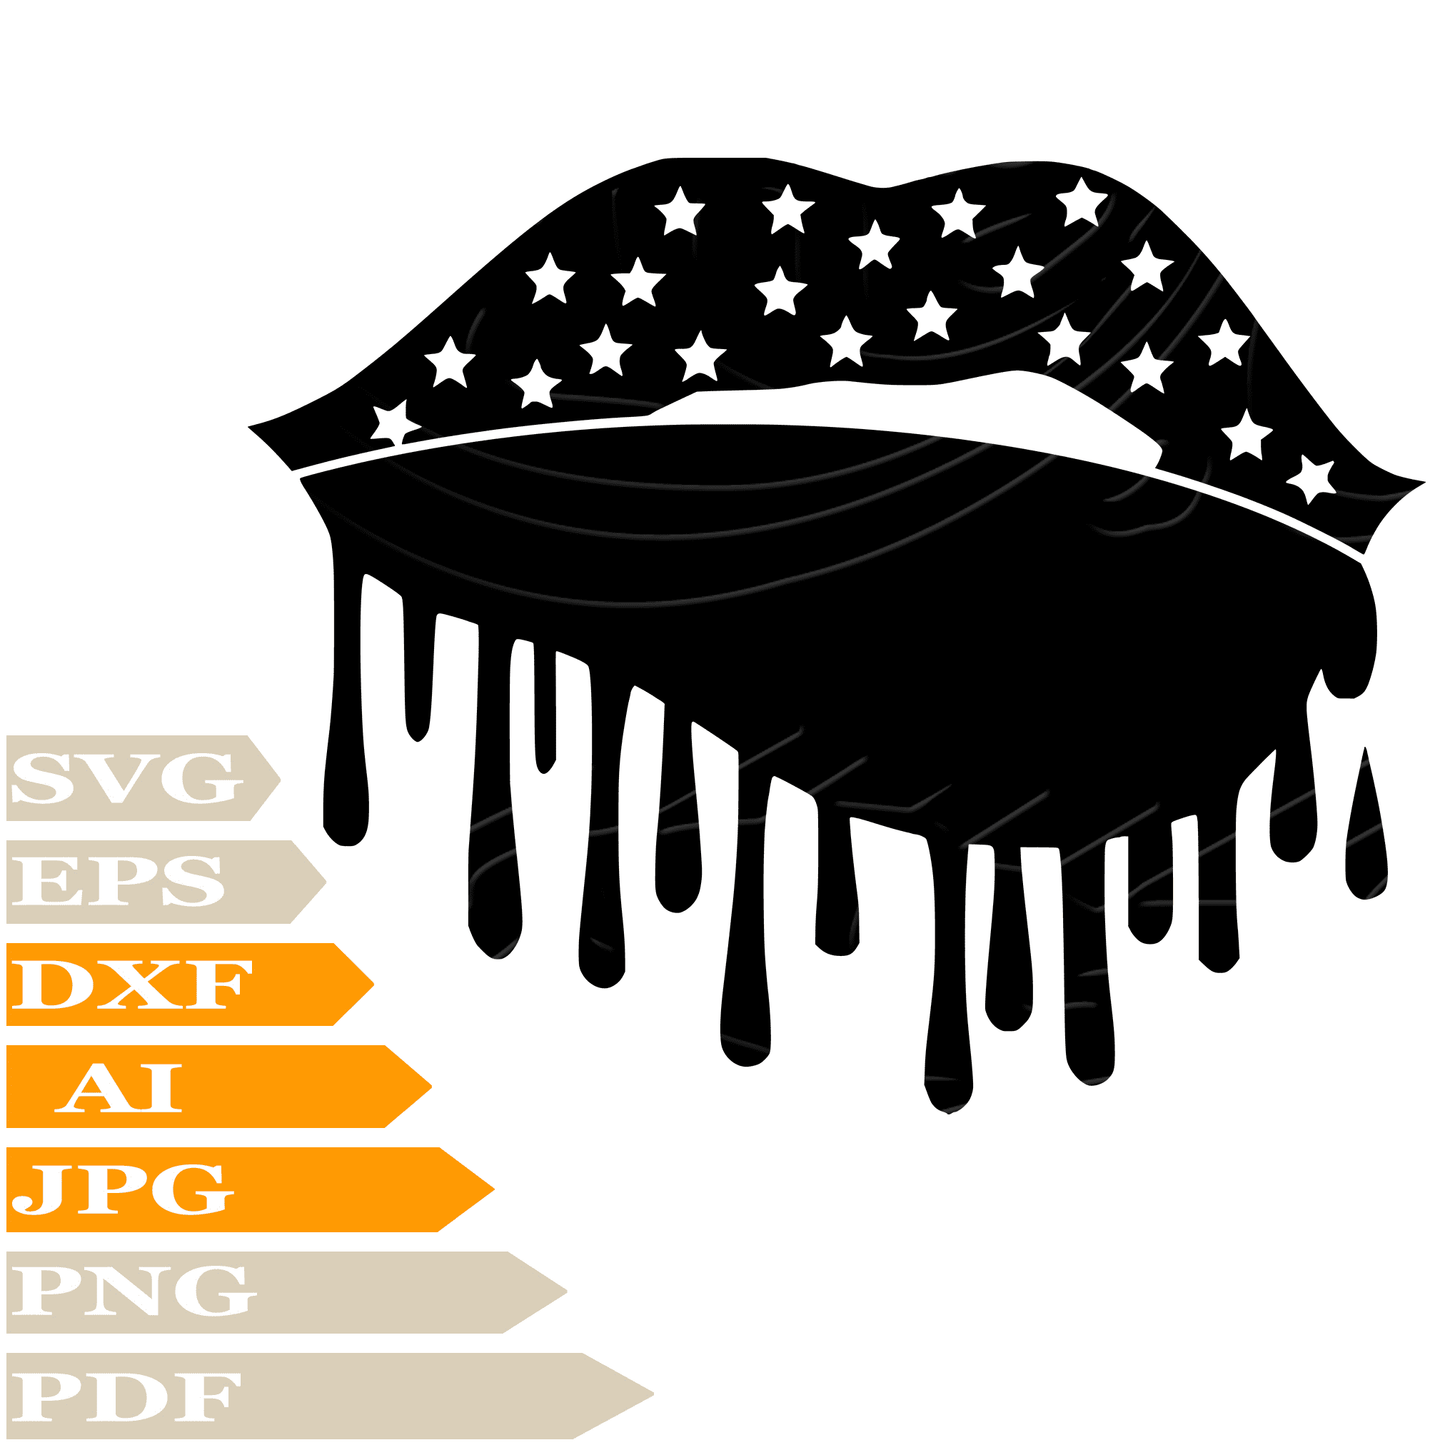 Sofvintage-Lips-Lips SVG-Lips With American Flag SVG Design-Women's Lips SVG File-Lips PNG-Women's Lips Vector Graphics-USA Flag For Cricut-Lips Clip art-Women's Lips Cut File-Lips USA Flag T-Shirt-Lips Wall Sticker-USA Flag For Tattoo-Women's Lips Printable-Lips Silhouette